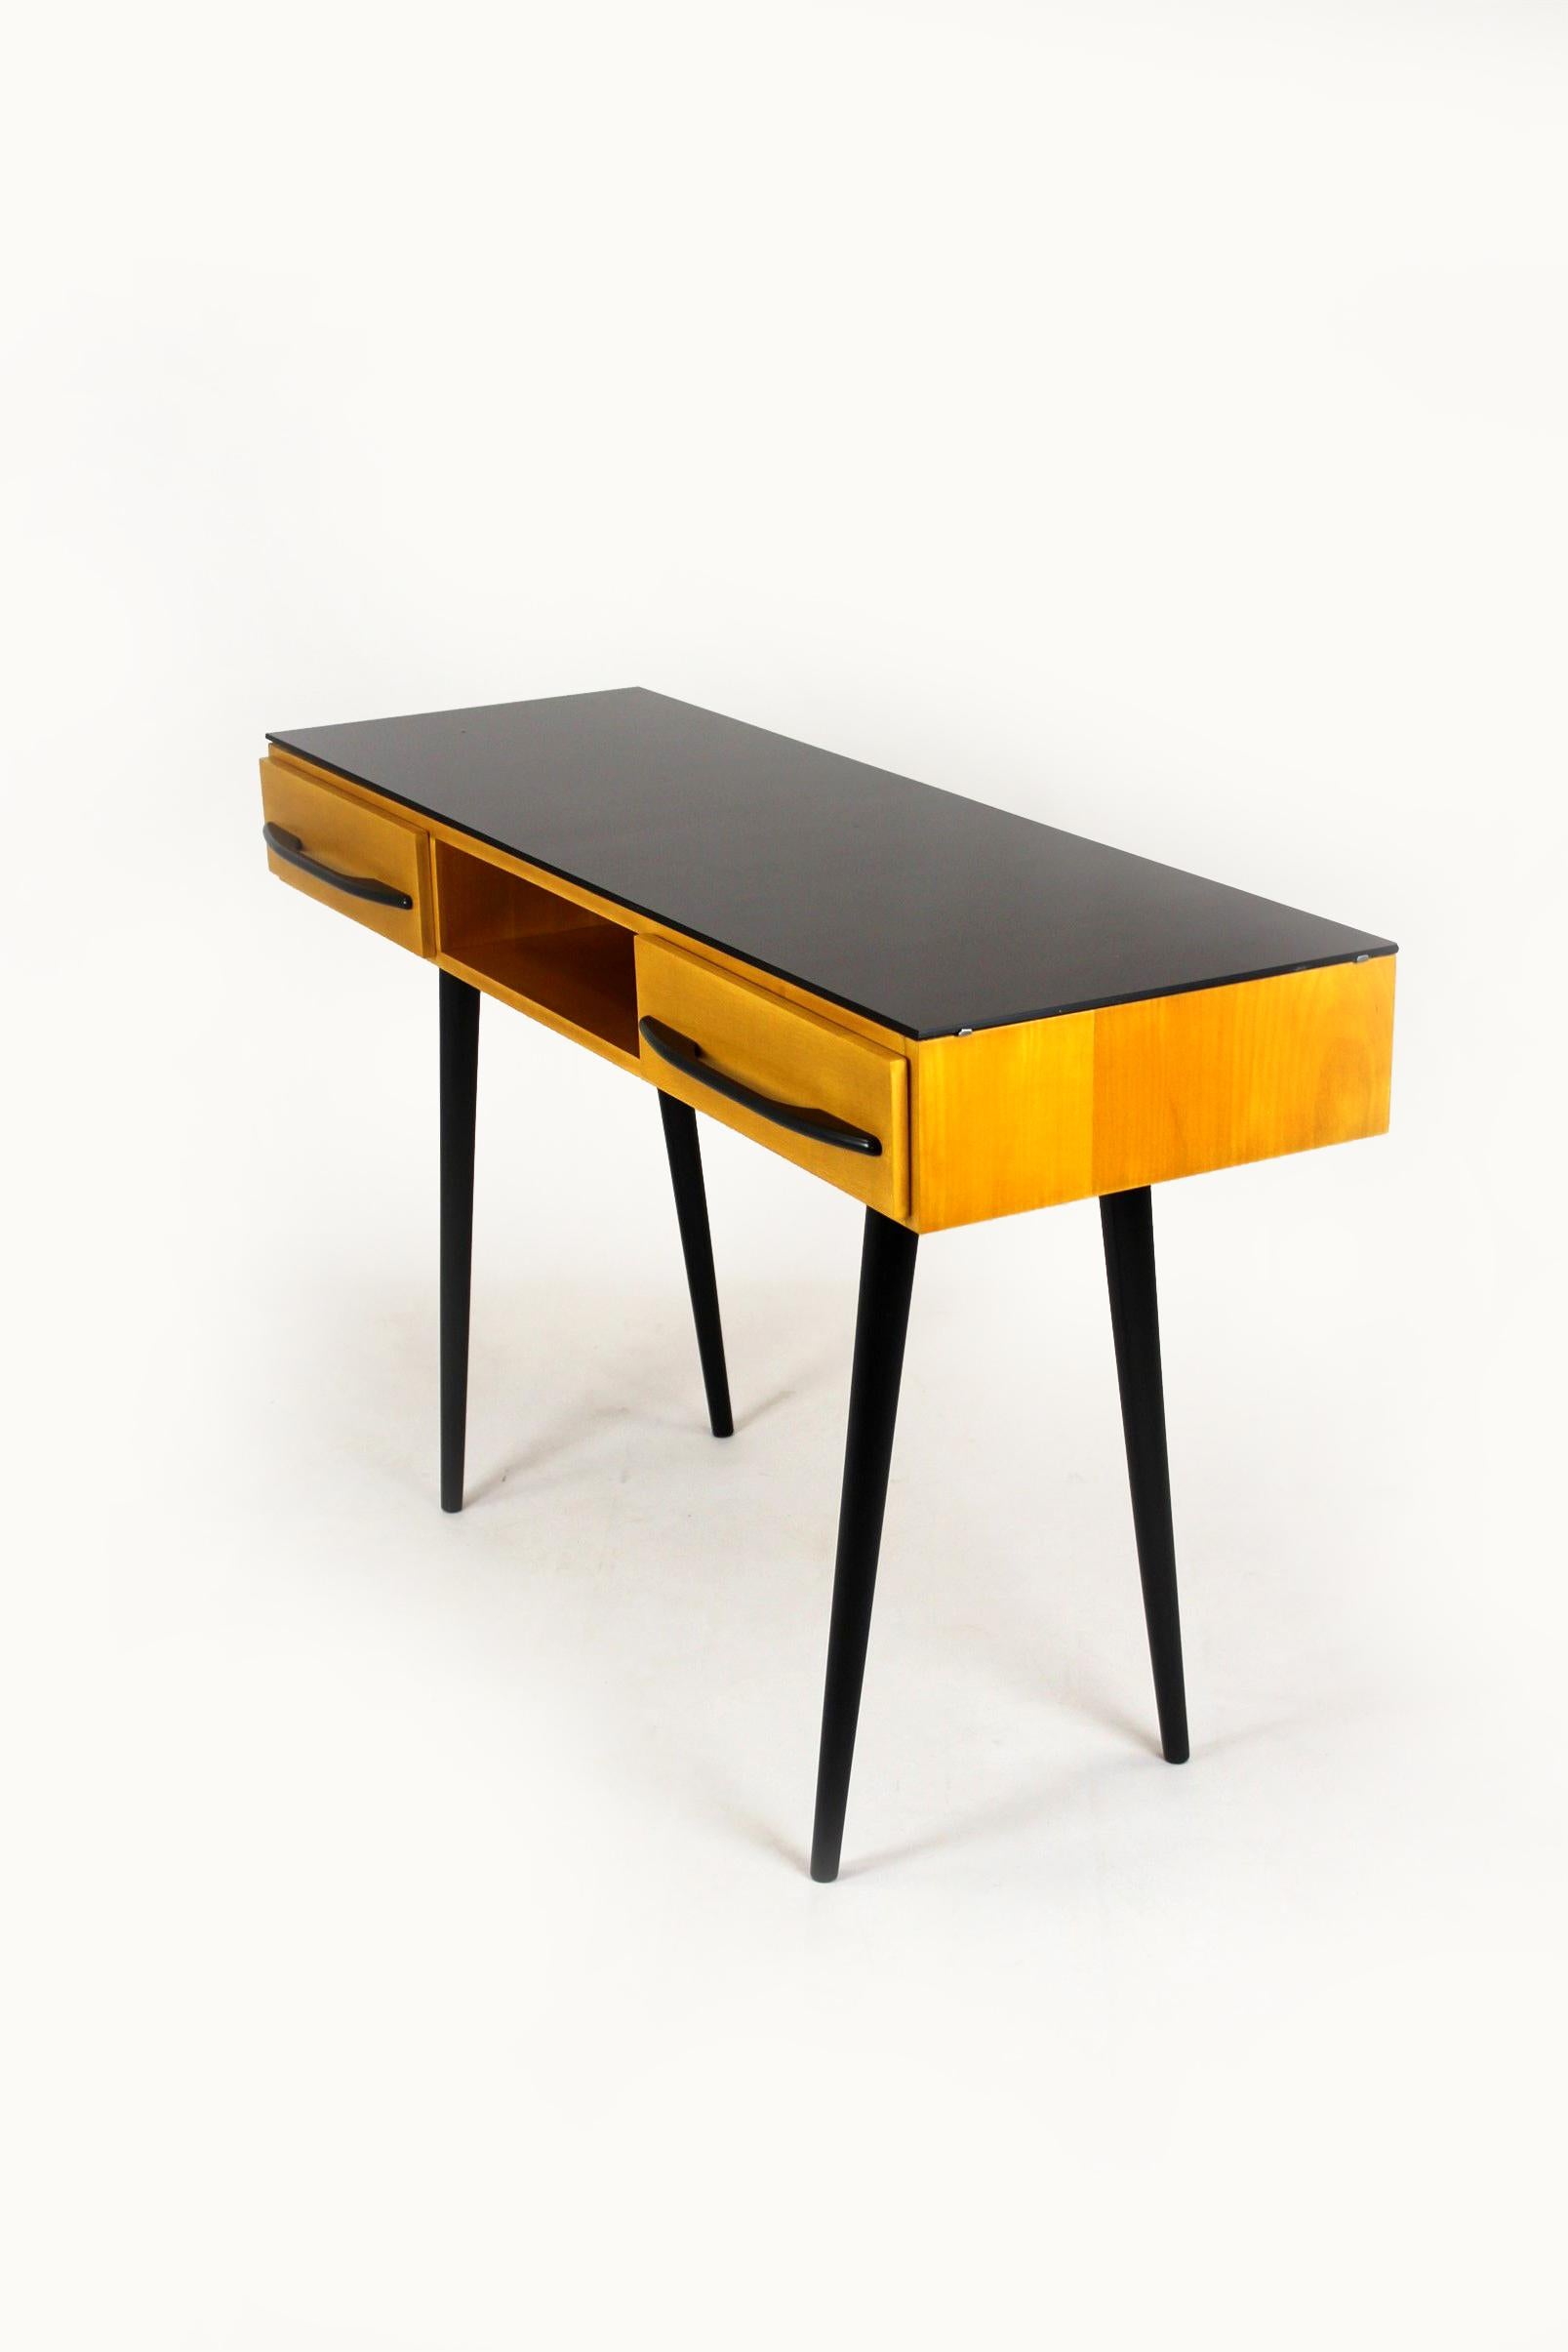 Midcentury Writing Desk or Console Table from Up Zavody, 1960s For Sale 2